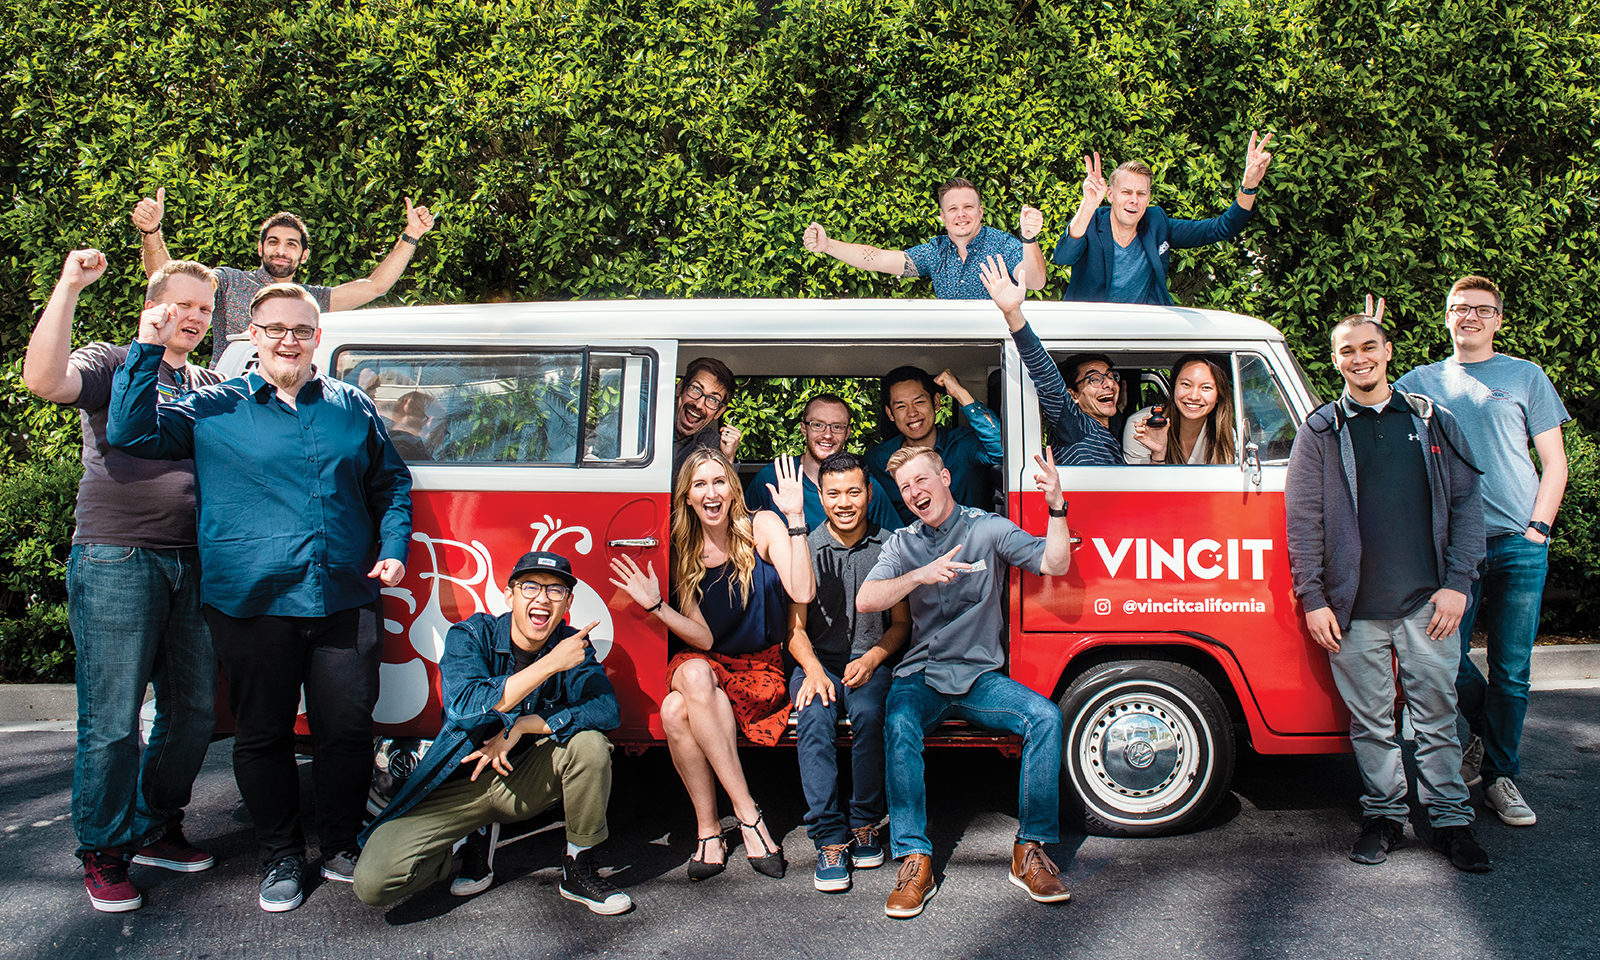 Software developers posing inside and around a red and white van branded with the Vincit logo Source: Irvine Standard